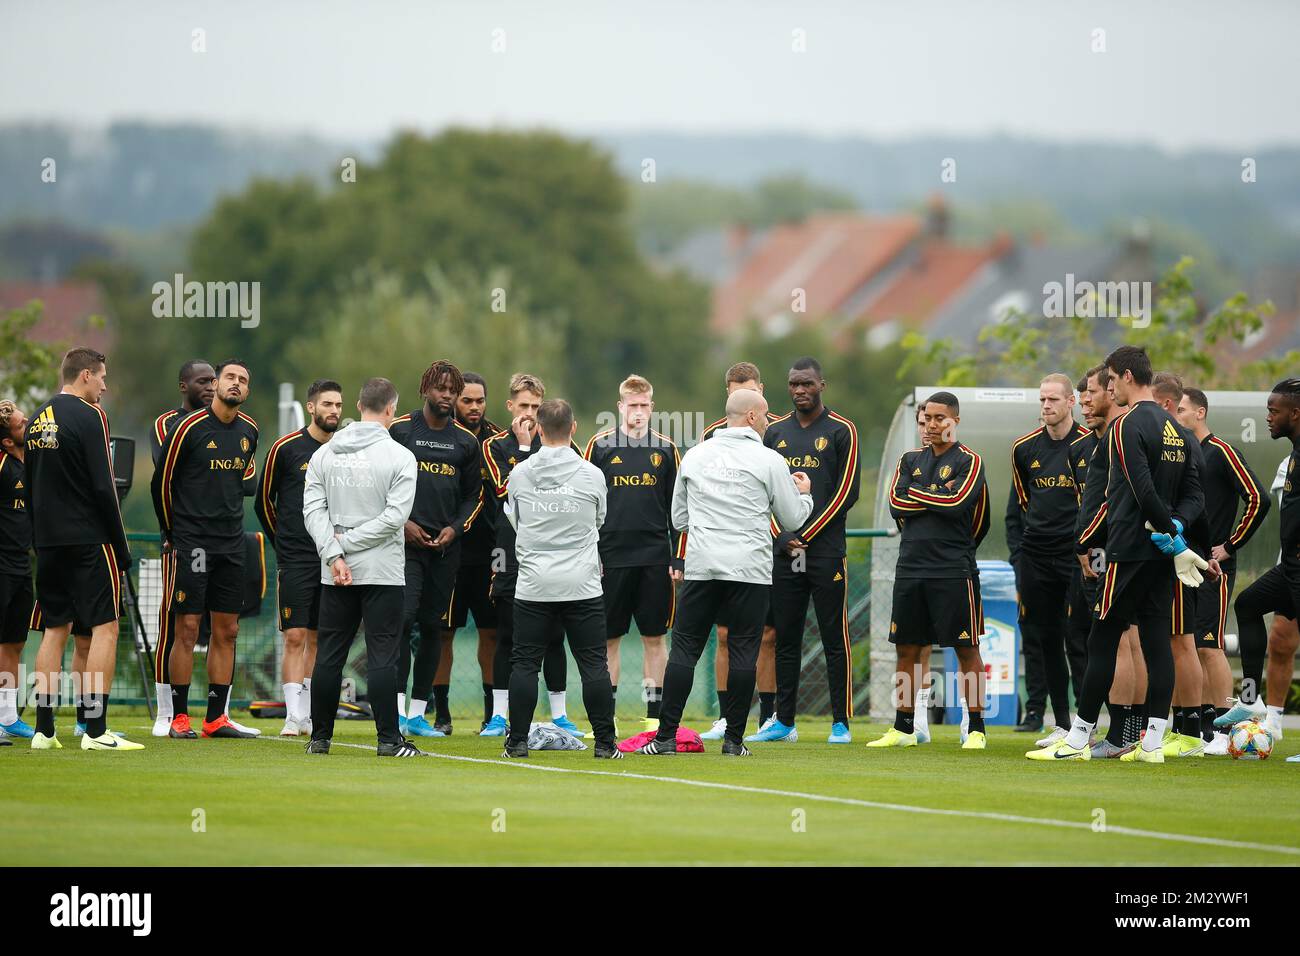 Belgium's players pictured during a training session of Belgian national team the Red Devils in Tubize, Wednesday 04 September 2019. The team is preparing for two Euro 2020 qualifiers, against San Marino on Friday and Scotland next Tuesday. BELGA PHOTO BRUNO FAHY Stock Photo